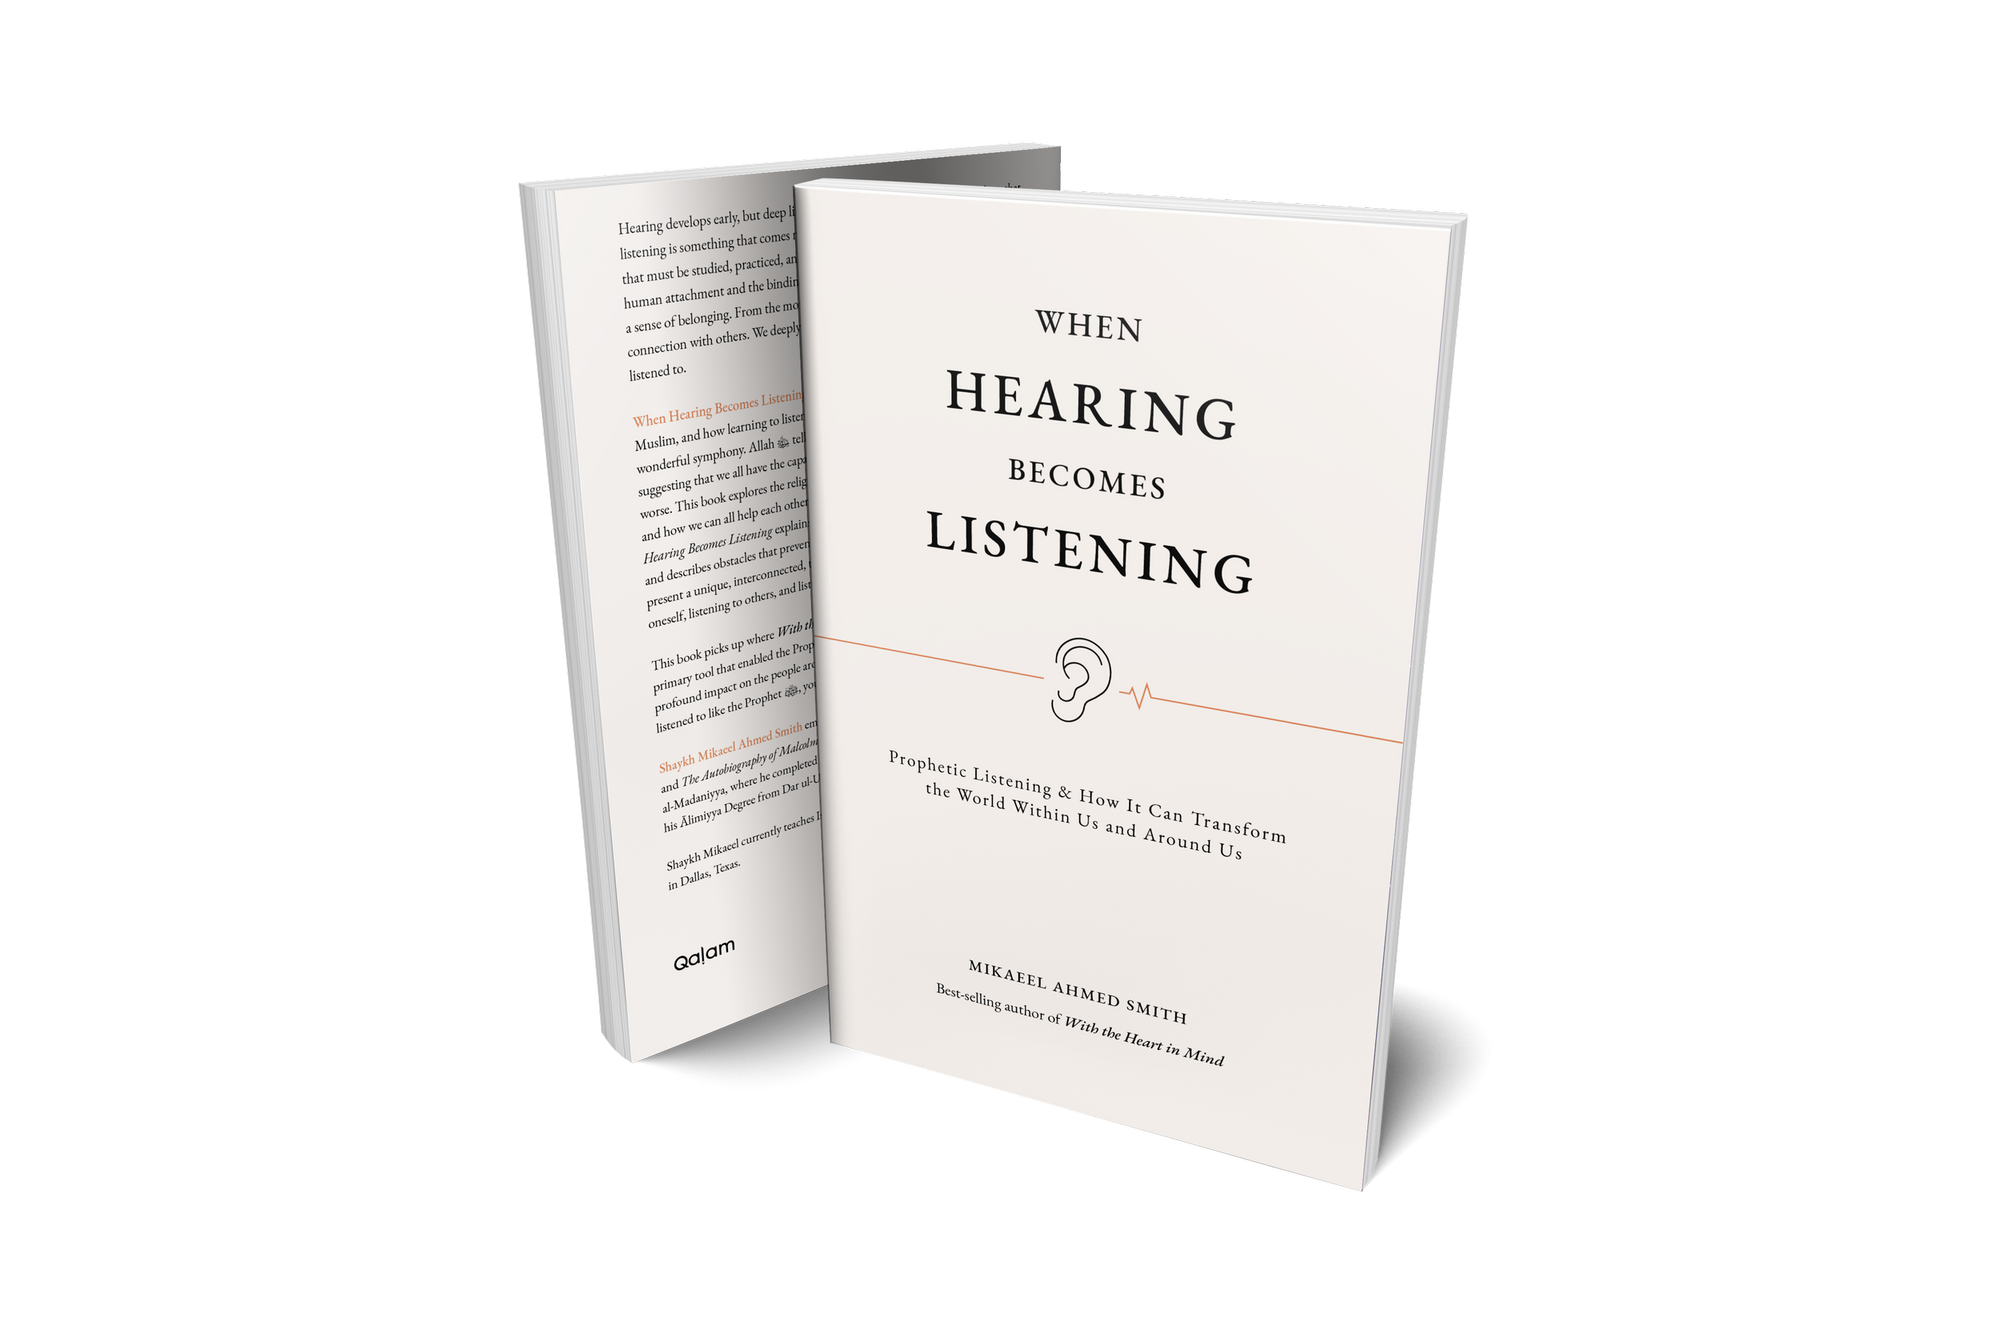 When Hearing Becomes Listening: Prophetic Listening and How It Can Transform the World Within Us and Around Us